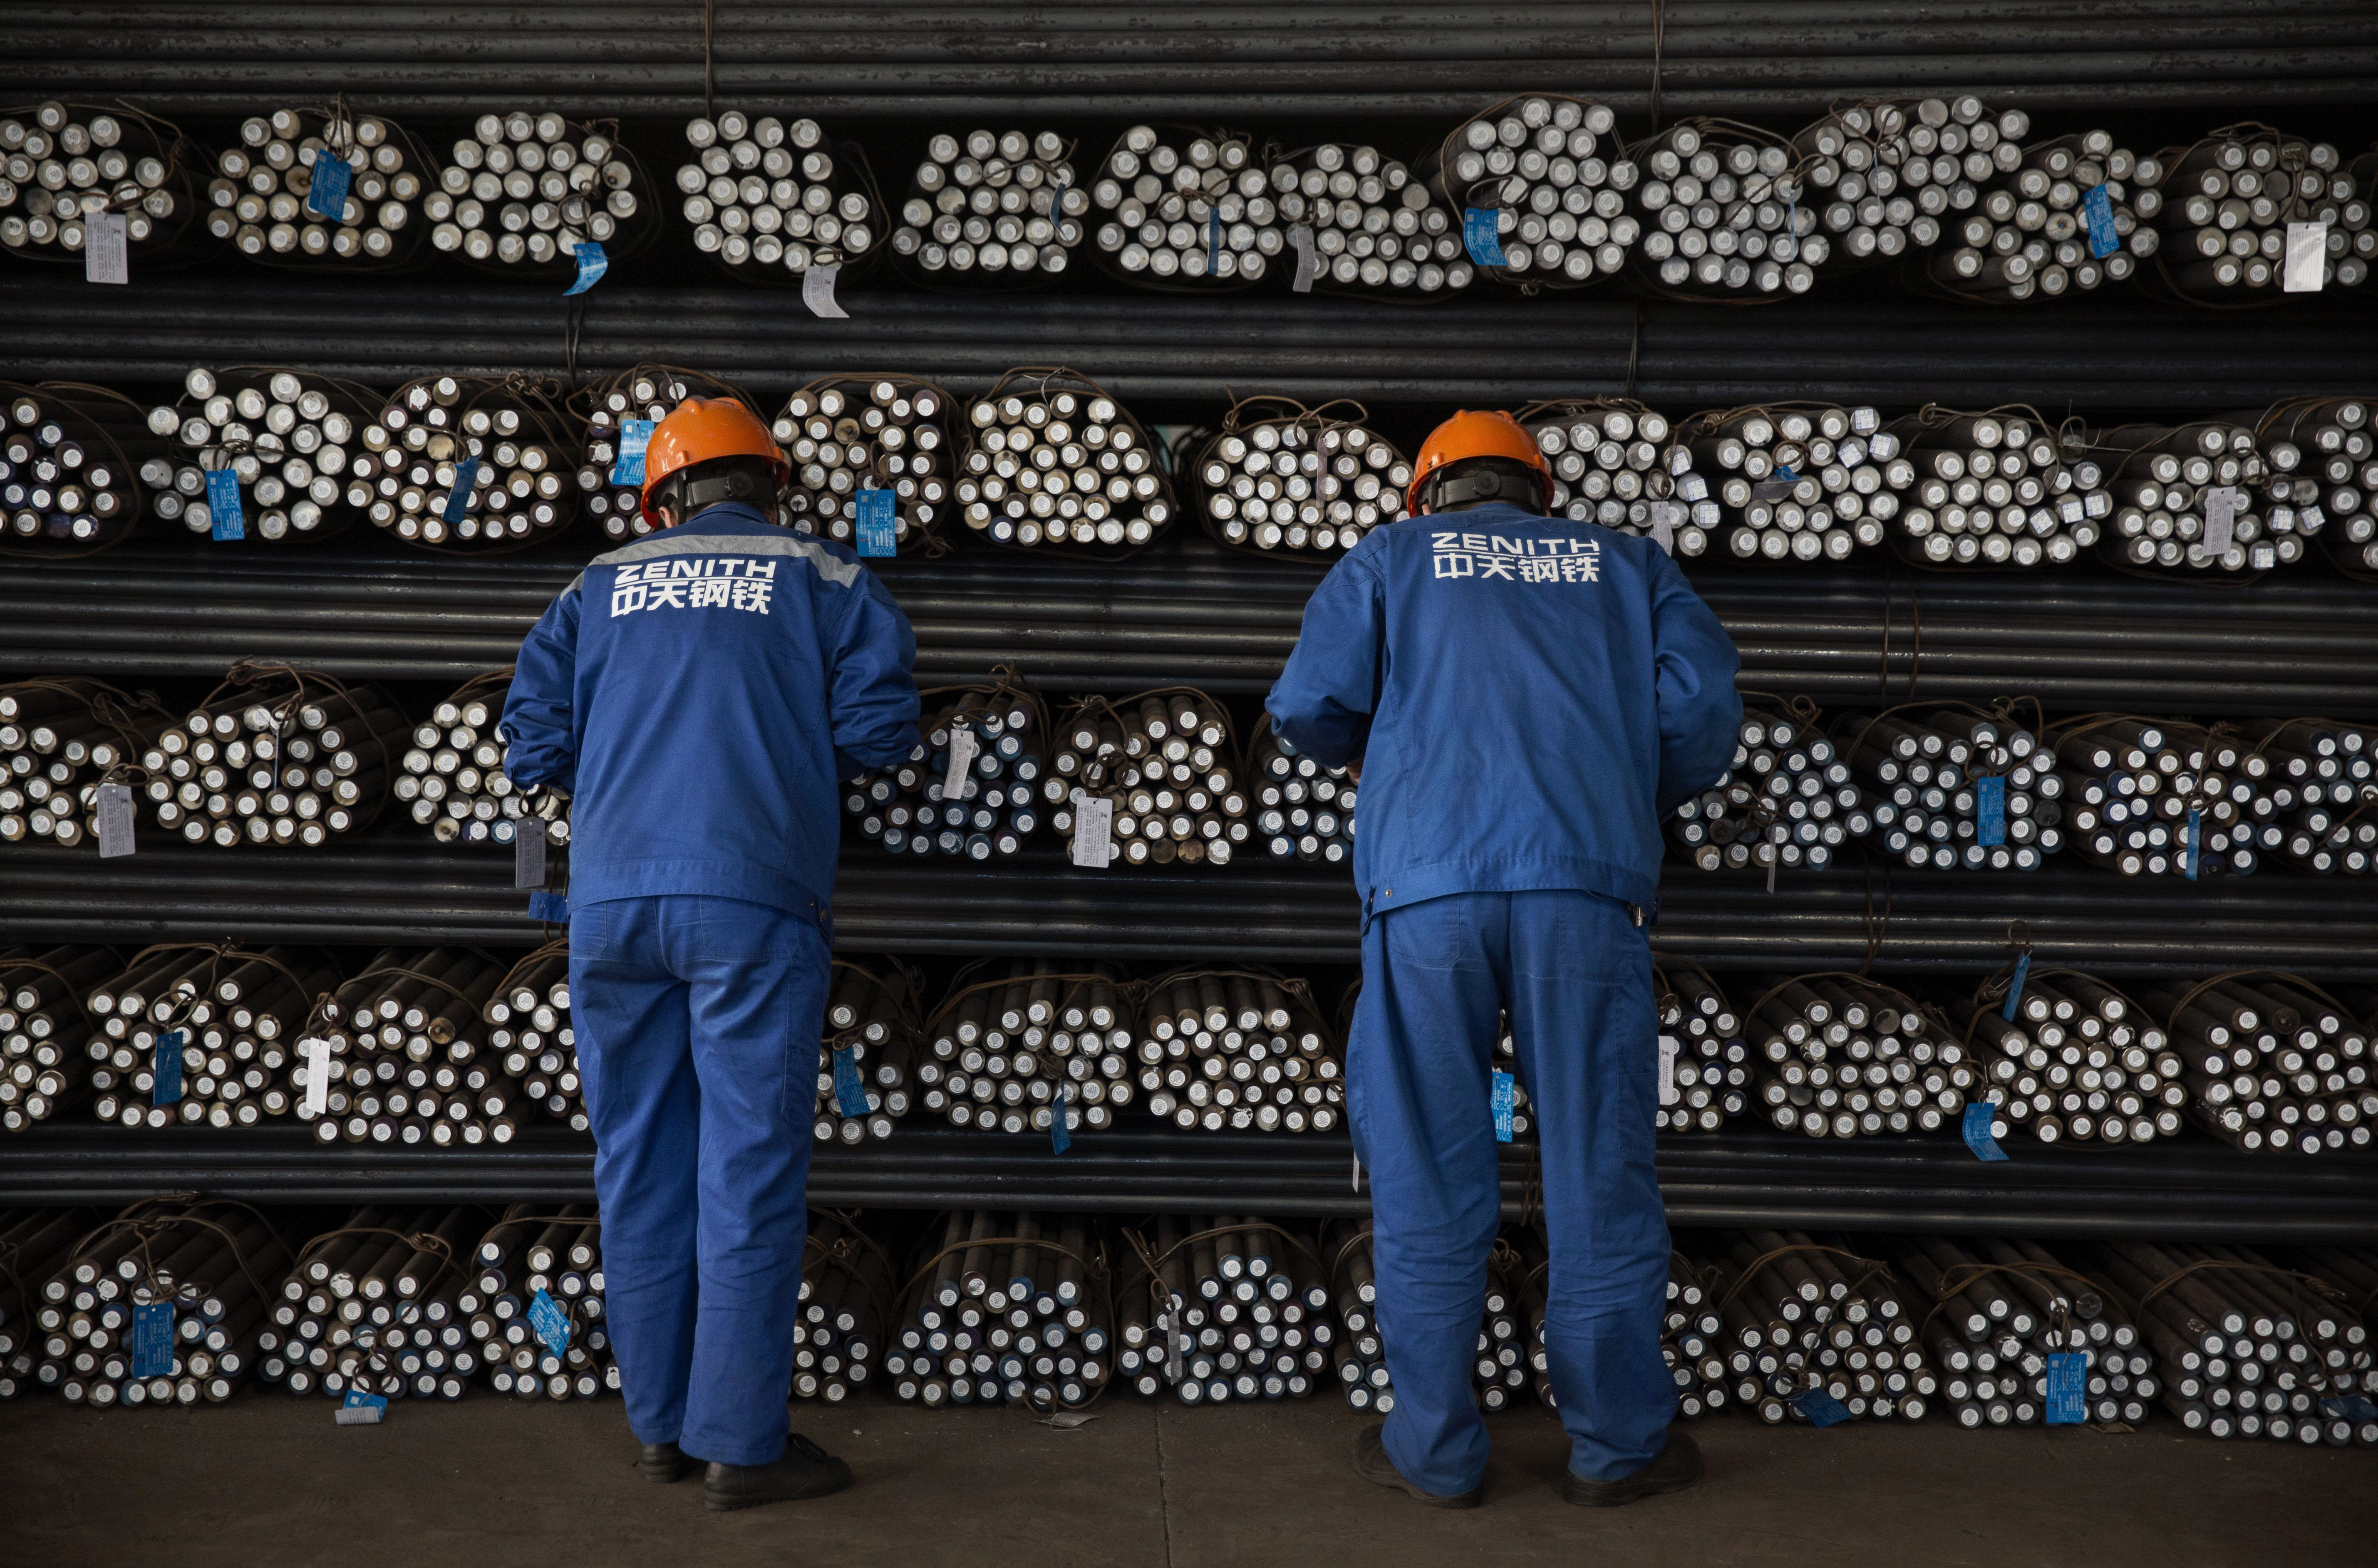 CHANGZHOU, CHINA - MAY 13: Workers inspect steel bars for quality in the production area of the Zhong Tian (Zenith) Steel Group Corporation on May 13, 2016 in Changzhou, Jiangsu. Zhong Tian (Zenith) Steel Group Corporation is a privately-owned manufacturer that employs over 13,000 workers at its facility in China's eastern Jiangsu province. Since 2001,the company says it has adopted new technology to streamline the production of premium quality steel and to reduce environmental impact. The majority of its steel output is for the Chinese market with 20% earmarked for export, mostly to Asia. The company says it is profitable, but admits business has dropped marginally from past years. China is the world's largest steel producer, accounting for over 50% of global supply. China's government has vowed to cut production capacity at state-owned enterprises by up to 150 million tonnes over five years to ease concerns of an oversupply on global markets. However, its efforts appear to be overshadowed by a recent increase in steel prices that has revived production at some Chinese facilities that had been closed down. (Photo by Kevin Frayer/Getty Images)